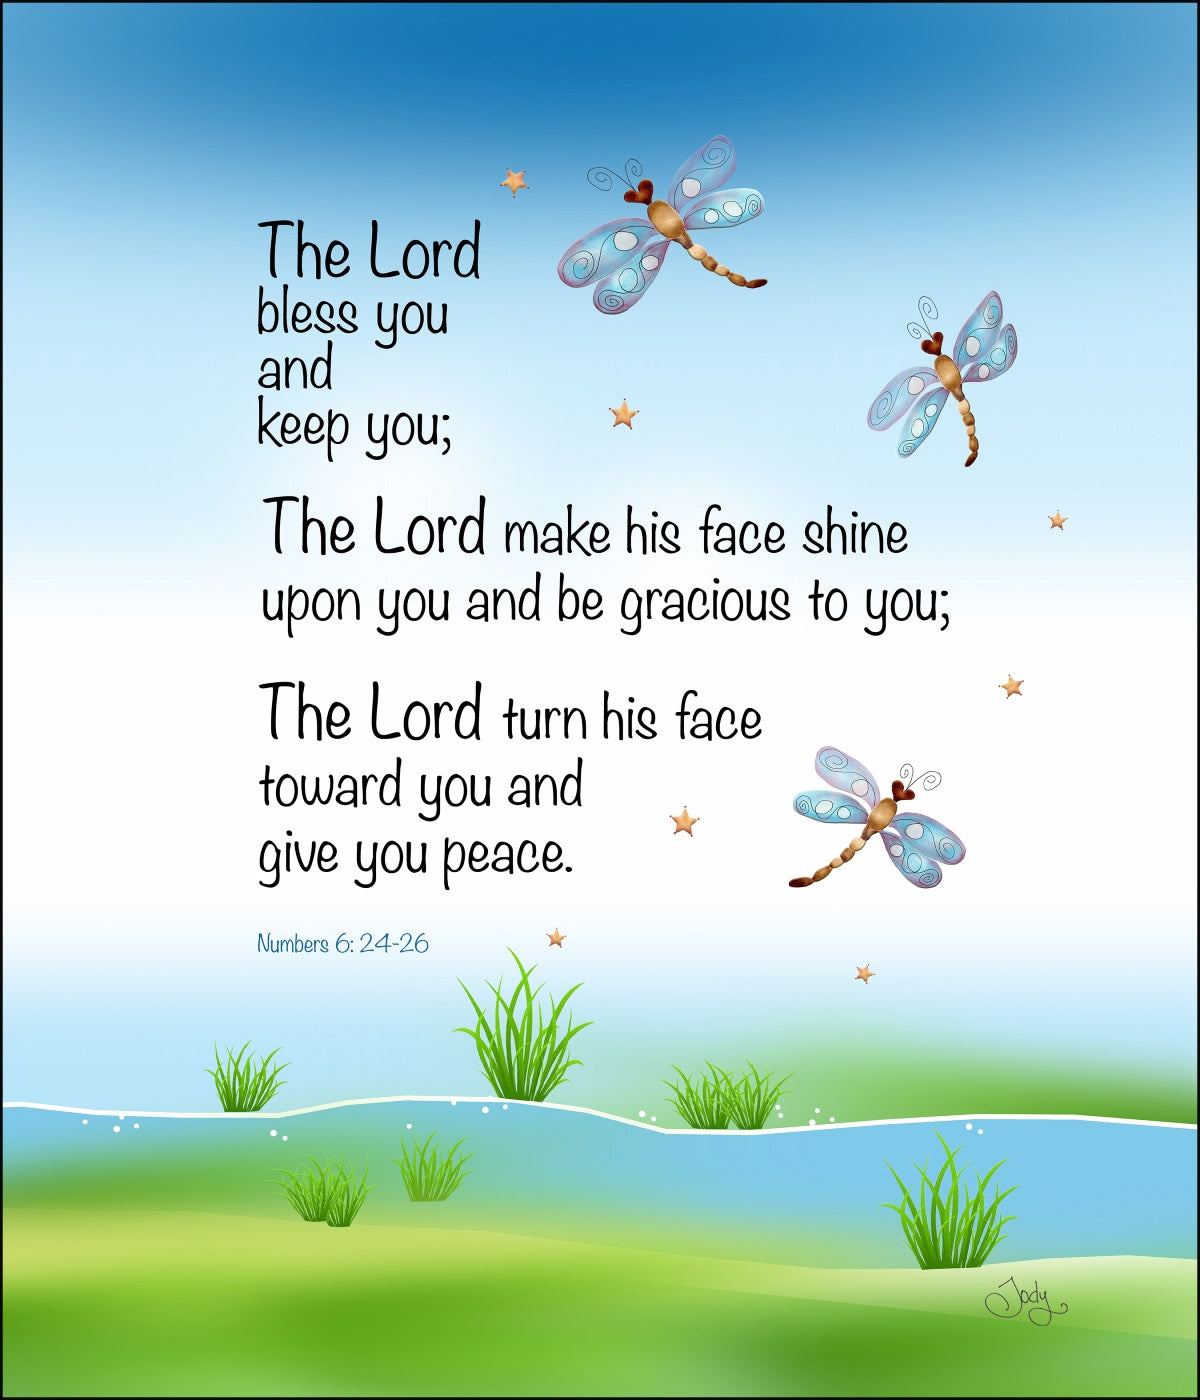  Numbers 6:24-26 - The Lord bless you and keep you; the Lord  make his face shine on you and be gracious to you; the Lord turn his face  toward you and